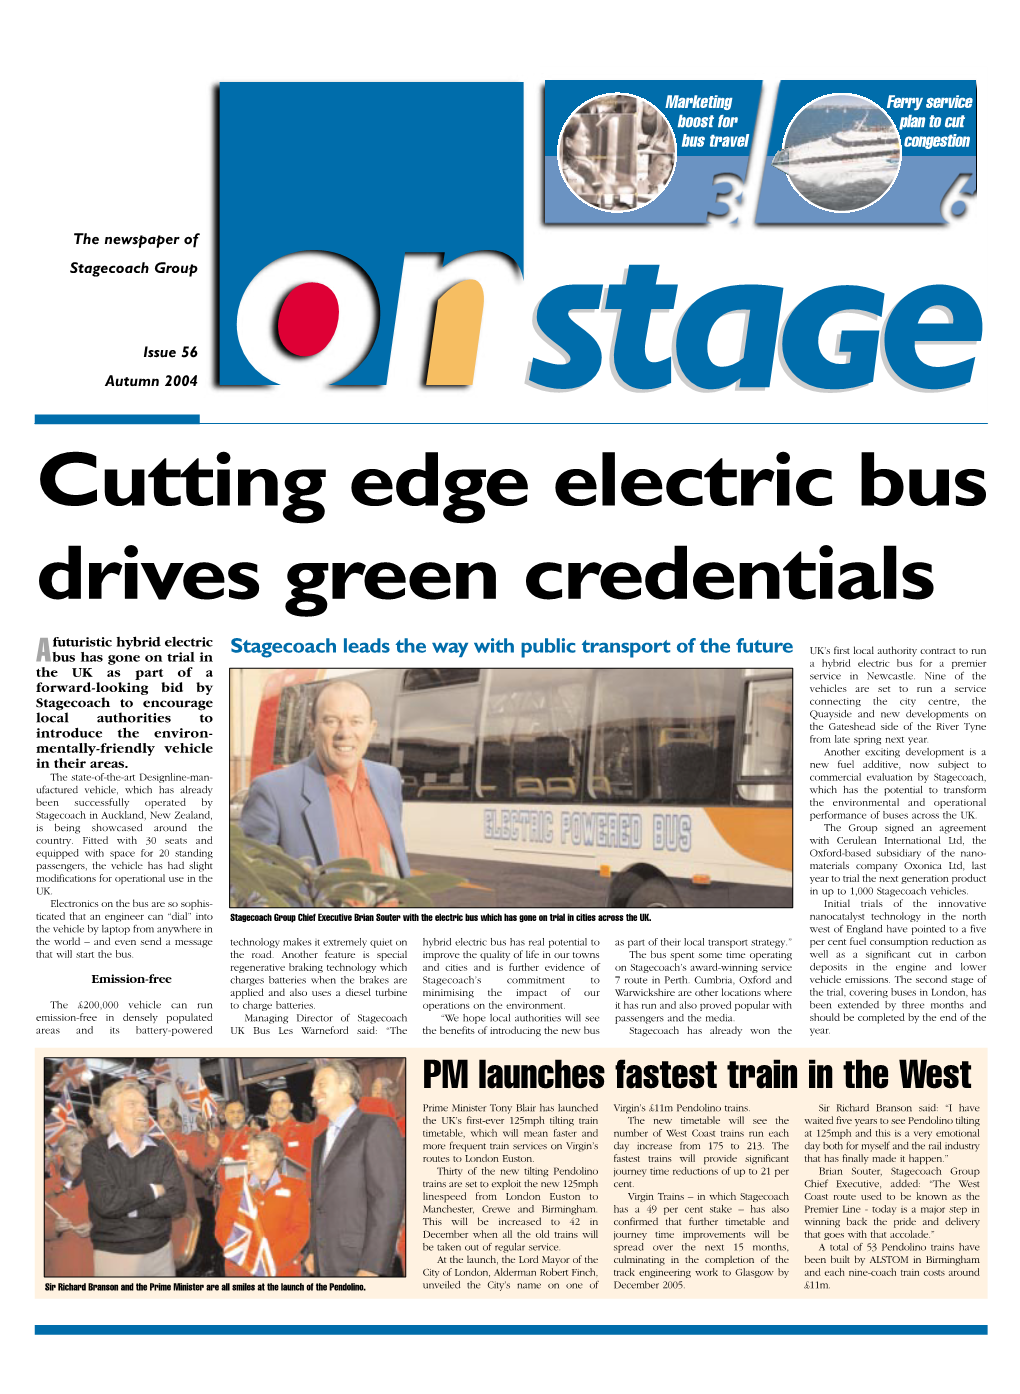 On Stagecoach’S Award-Winning Service Deposits in the Engine and Lower Emission-Free Charges Batteries When the Brakes Are Stagecoach’S Commitment to 7 Route in Perth